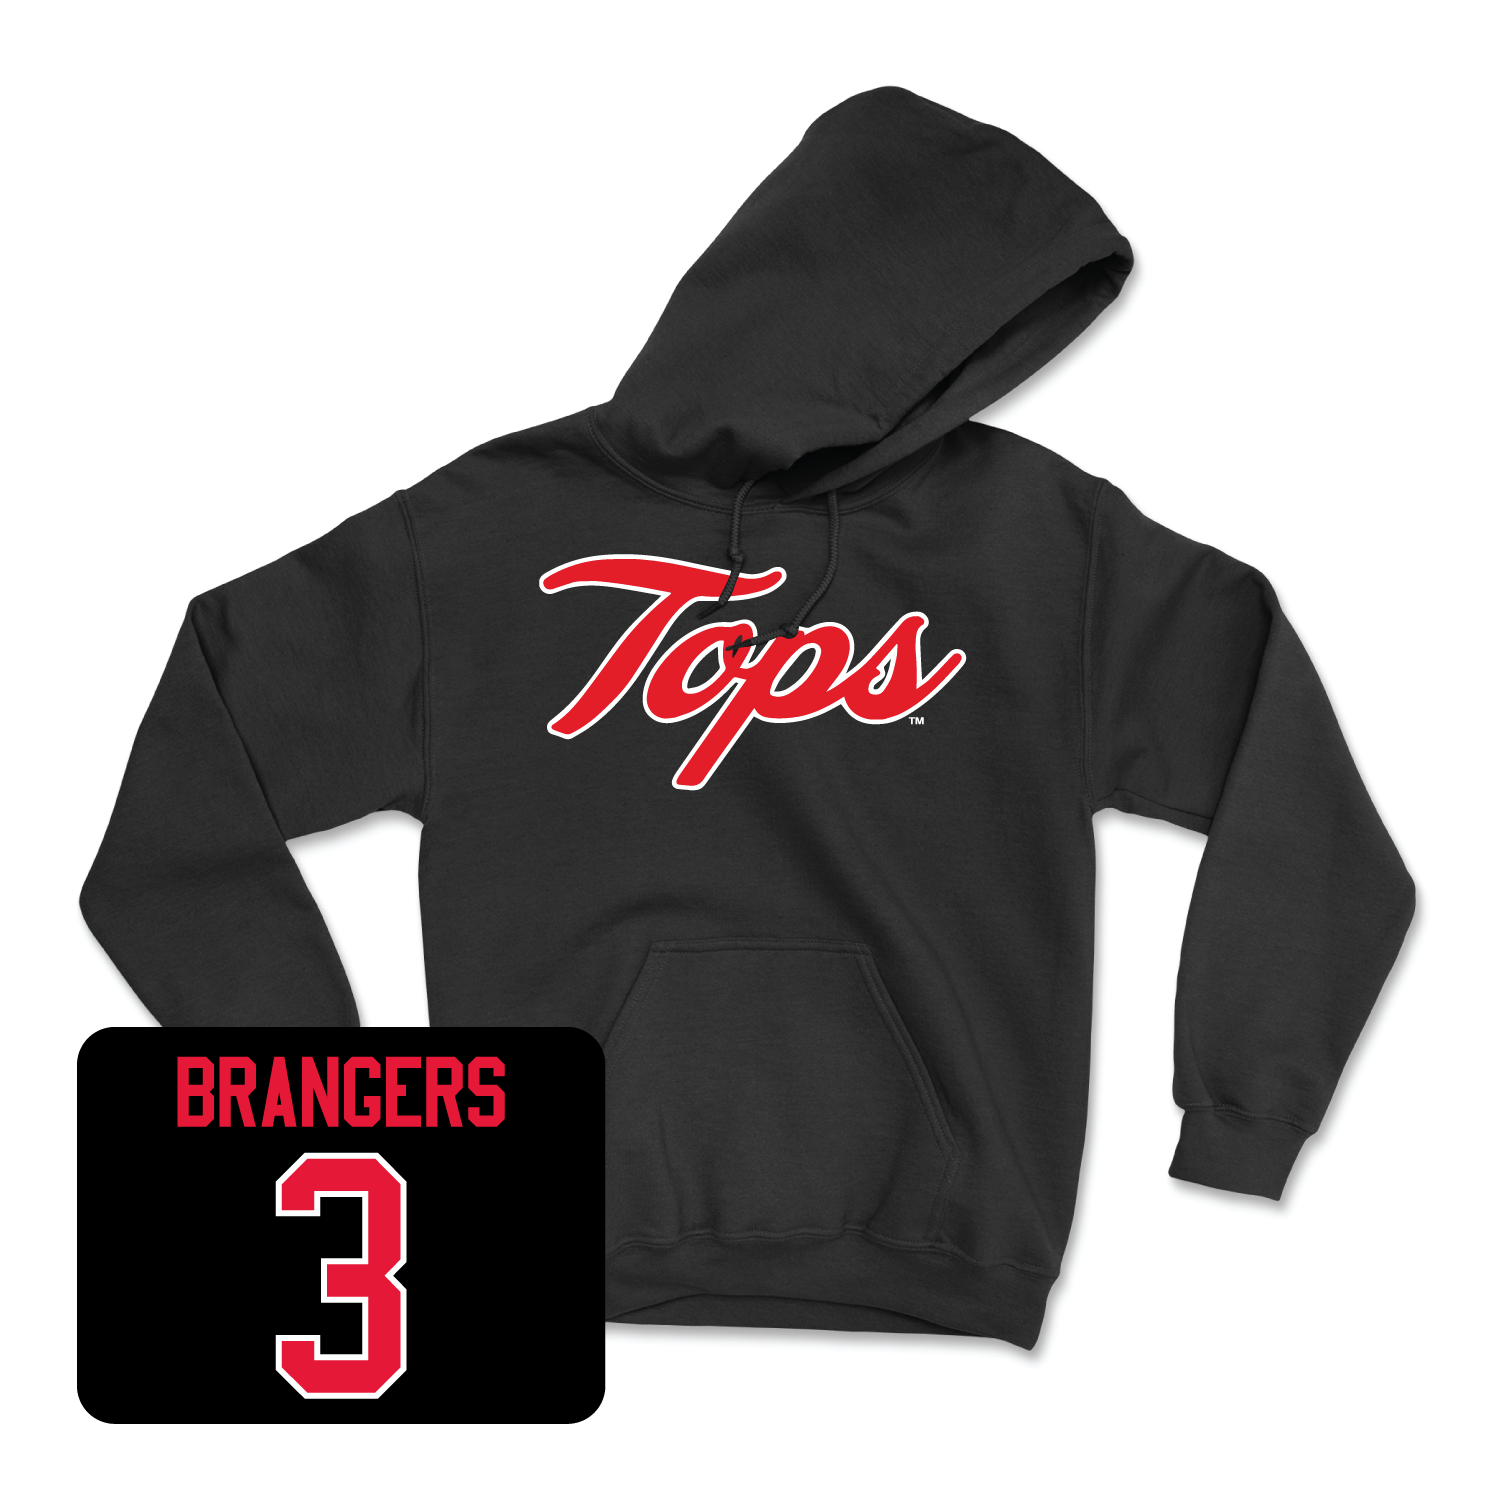 Black Women's Volleyball Tops Hoodie Youth Small / Kelsey Brangers | #3